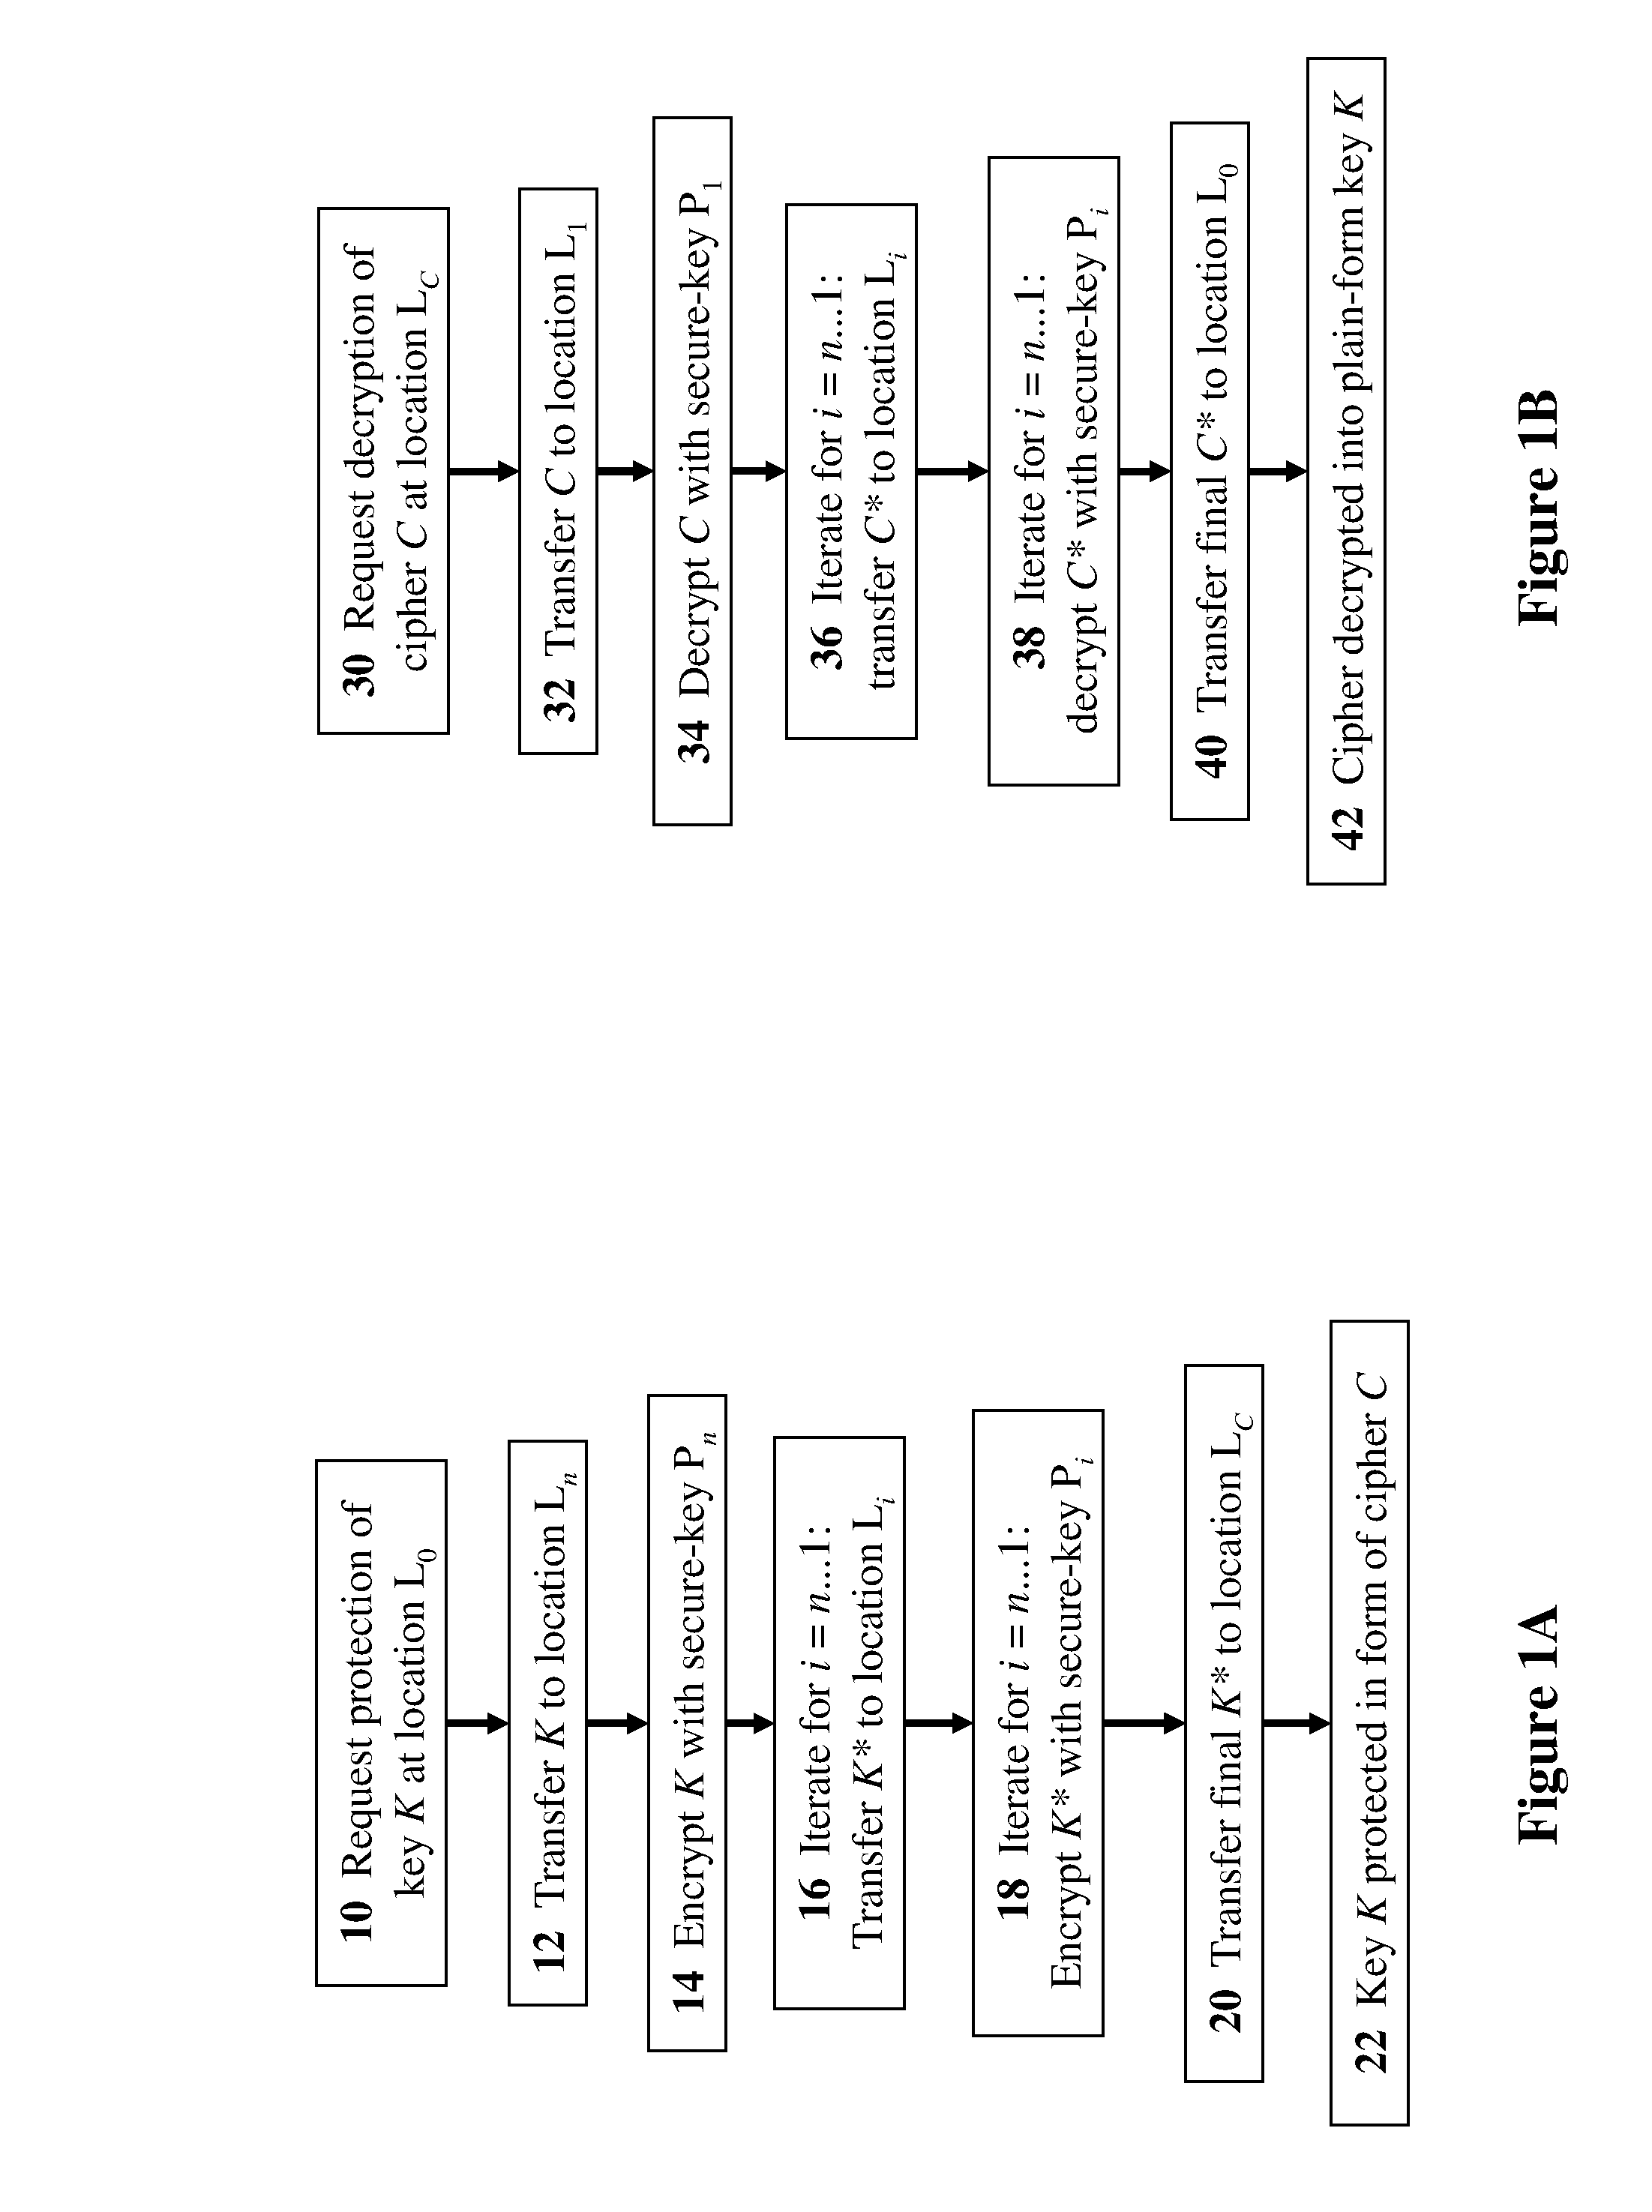 Methods, devices, and media for secure key management in a non-secured, distributed, virtualized environment with applications to cloud-computing security and management